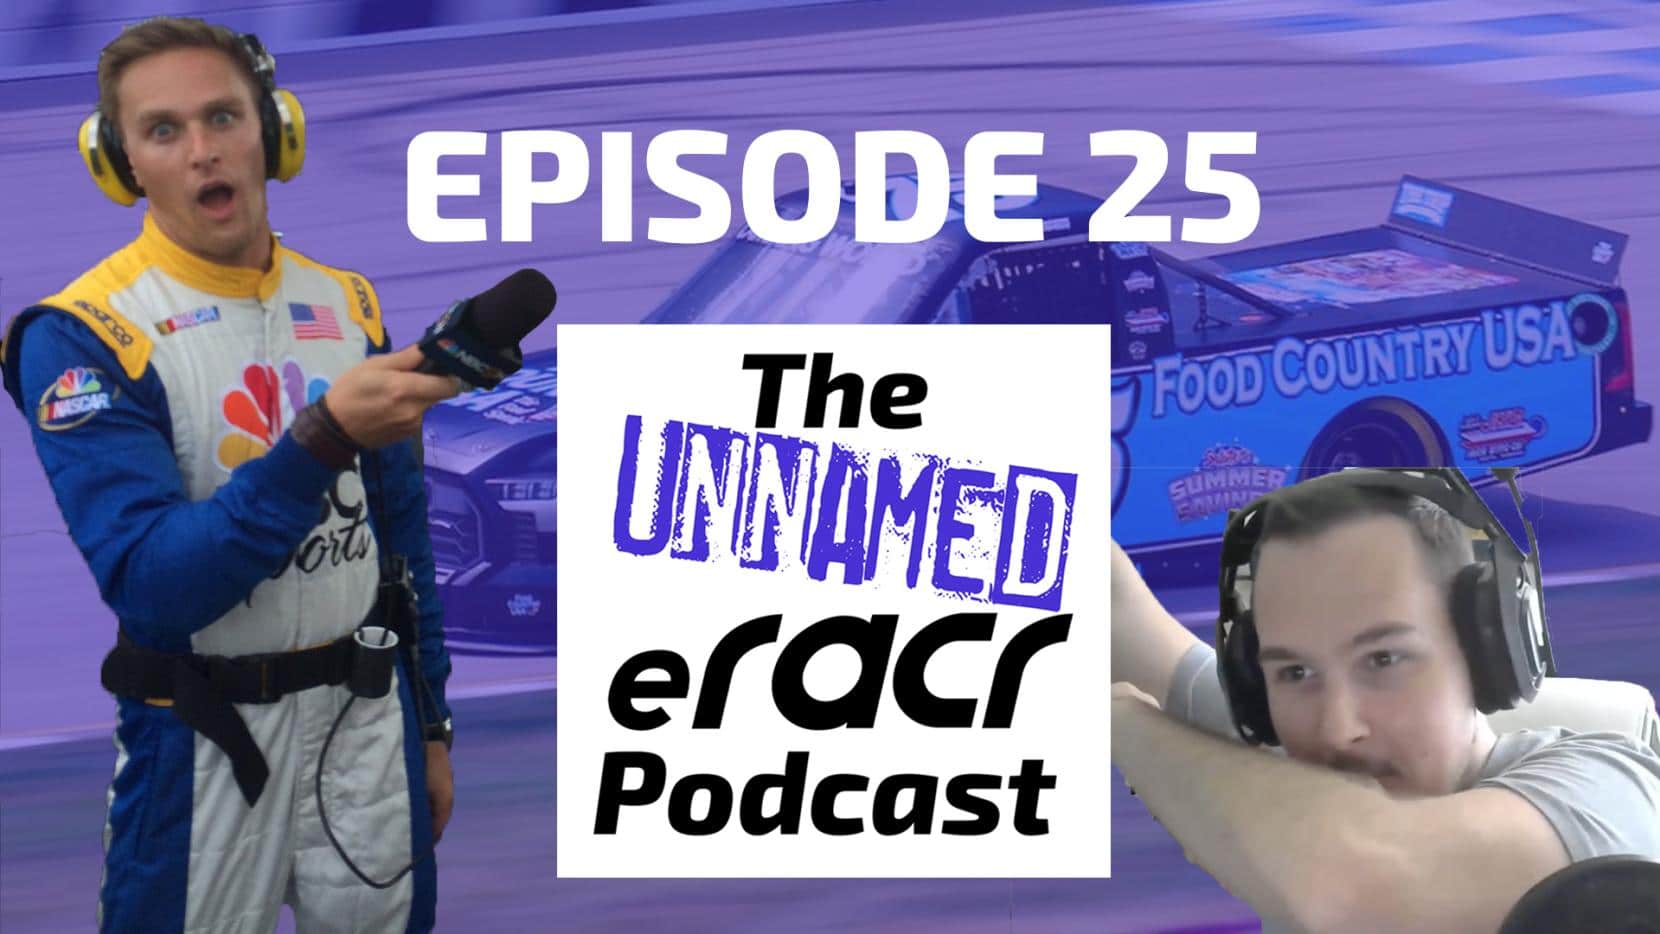 The Unnamed eRacr Podcast – Episode 25 – Listen or Watch NOW 🎧📺